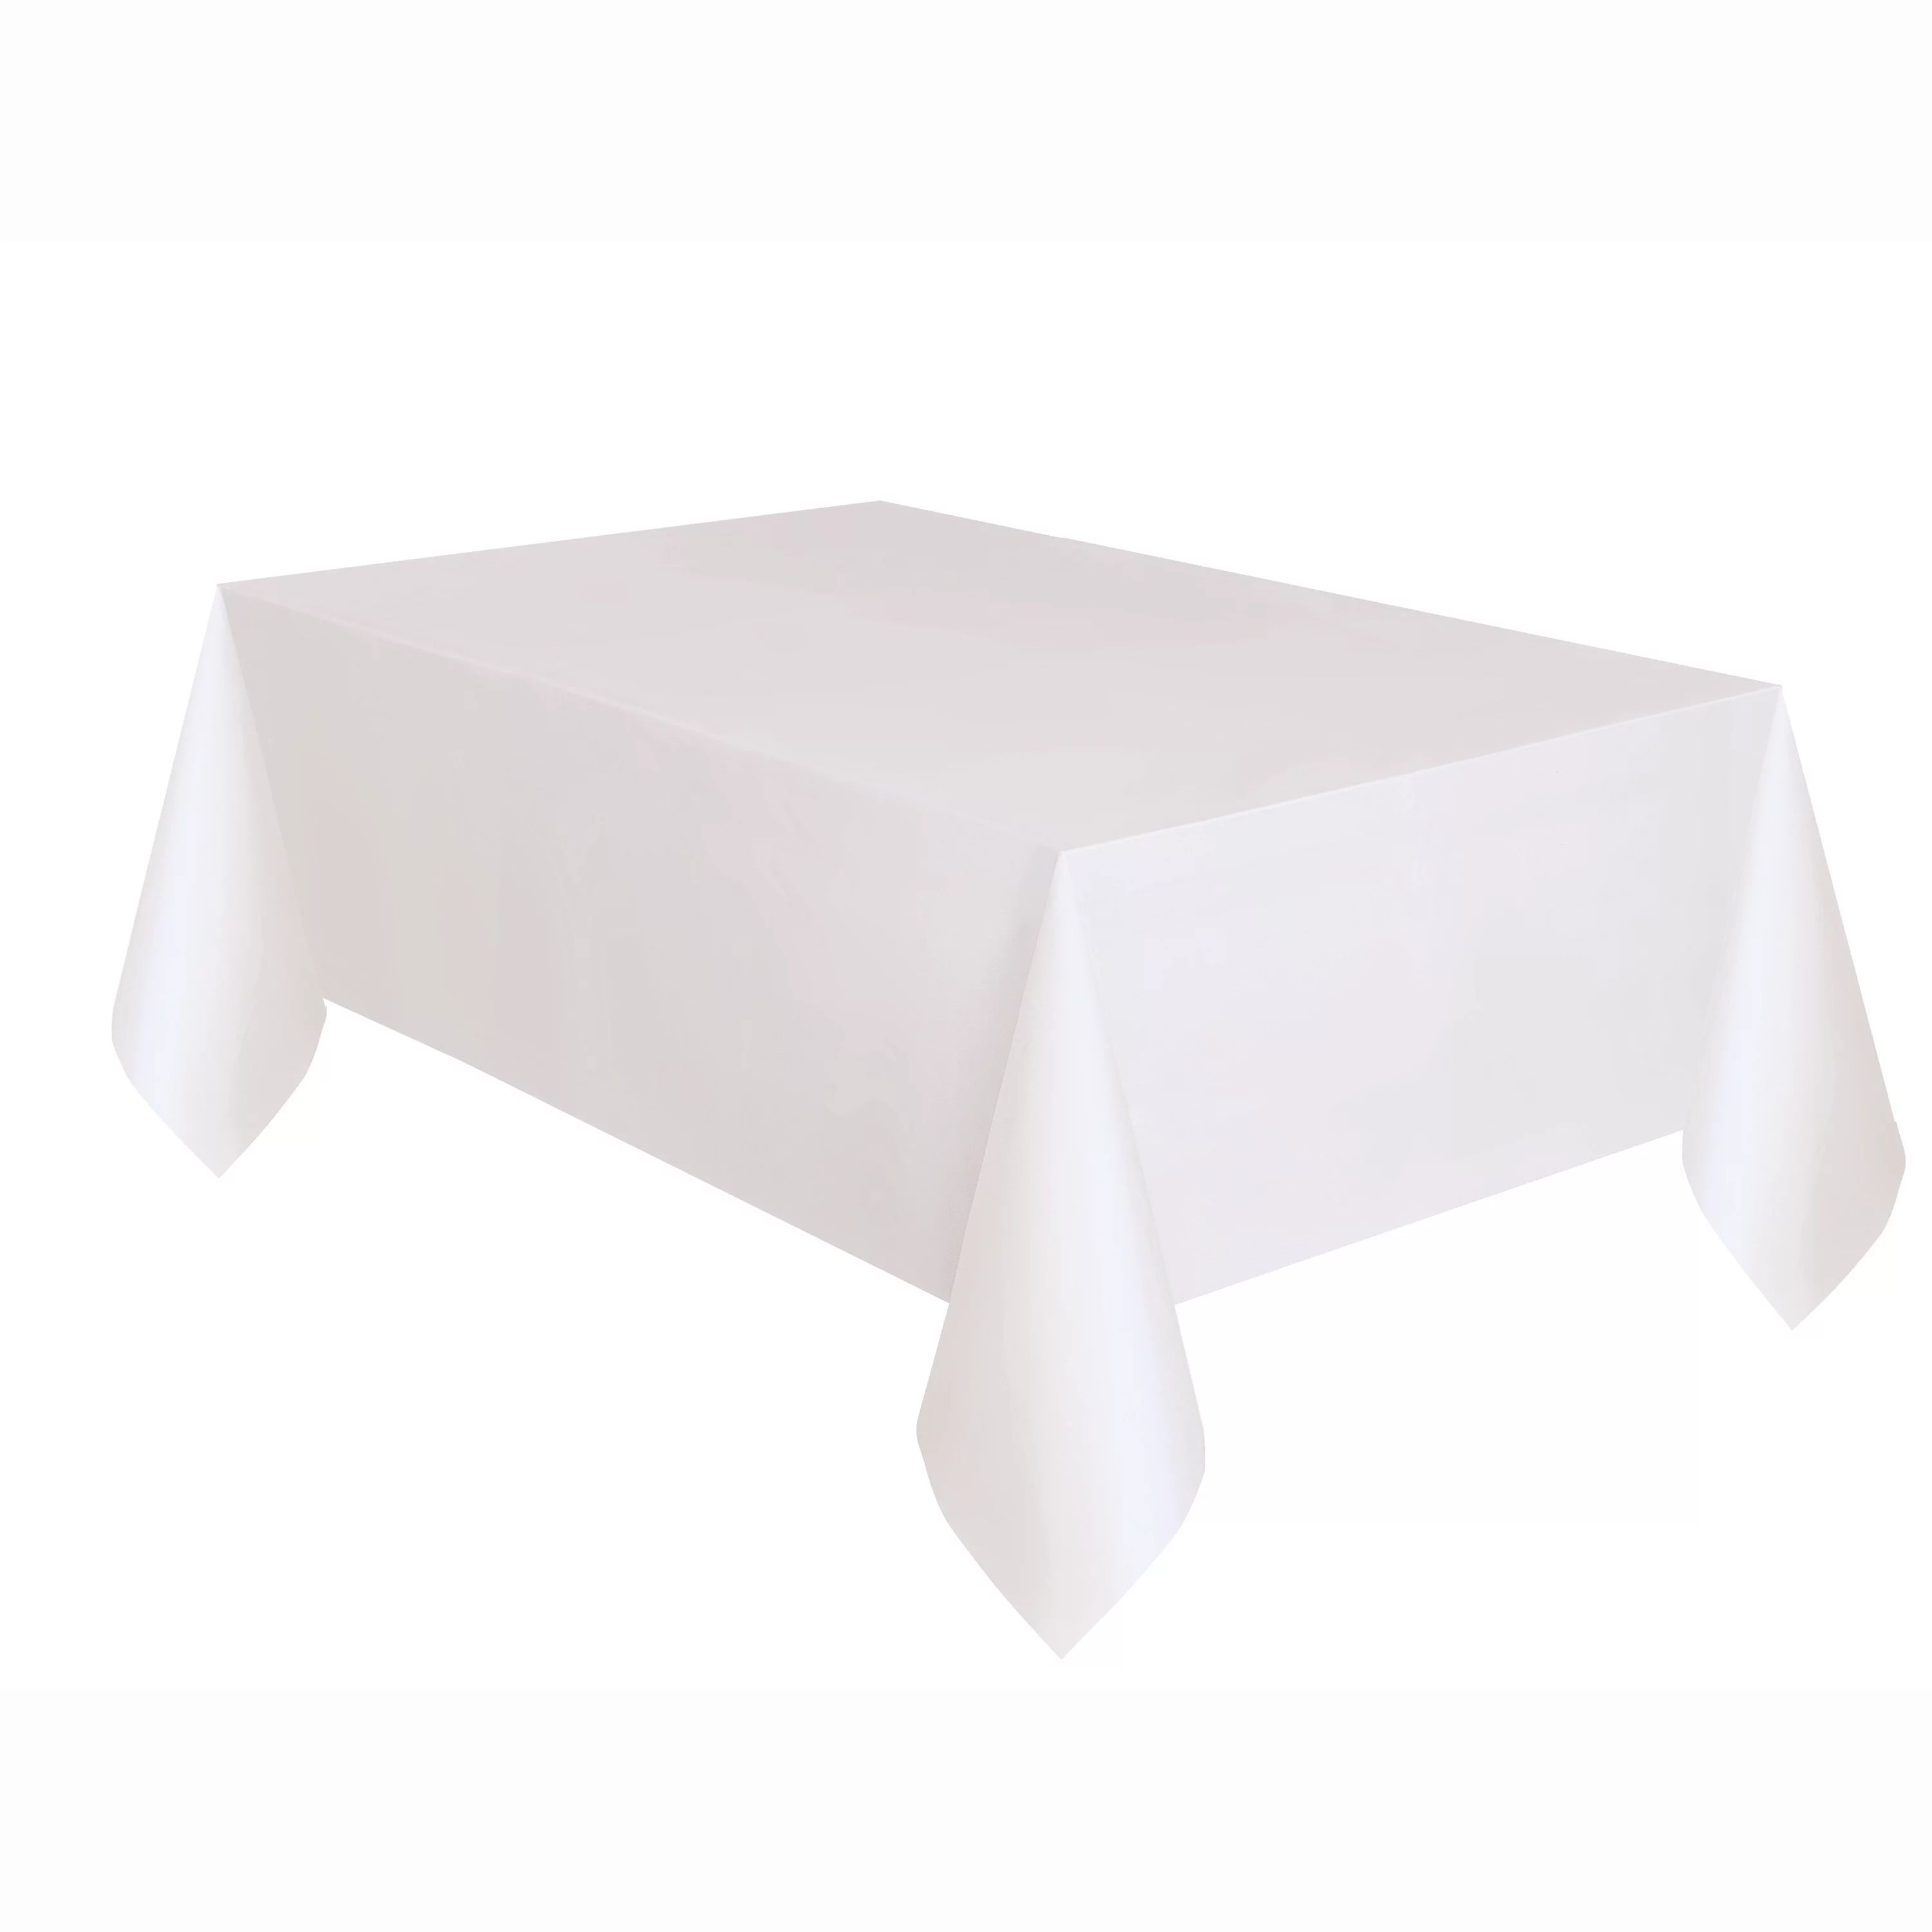 Way to Celebrate! White Plastic Party Tablecloth, 108in x 54in | Walmart (US)